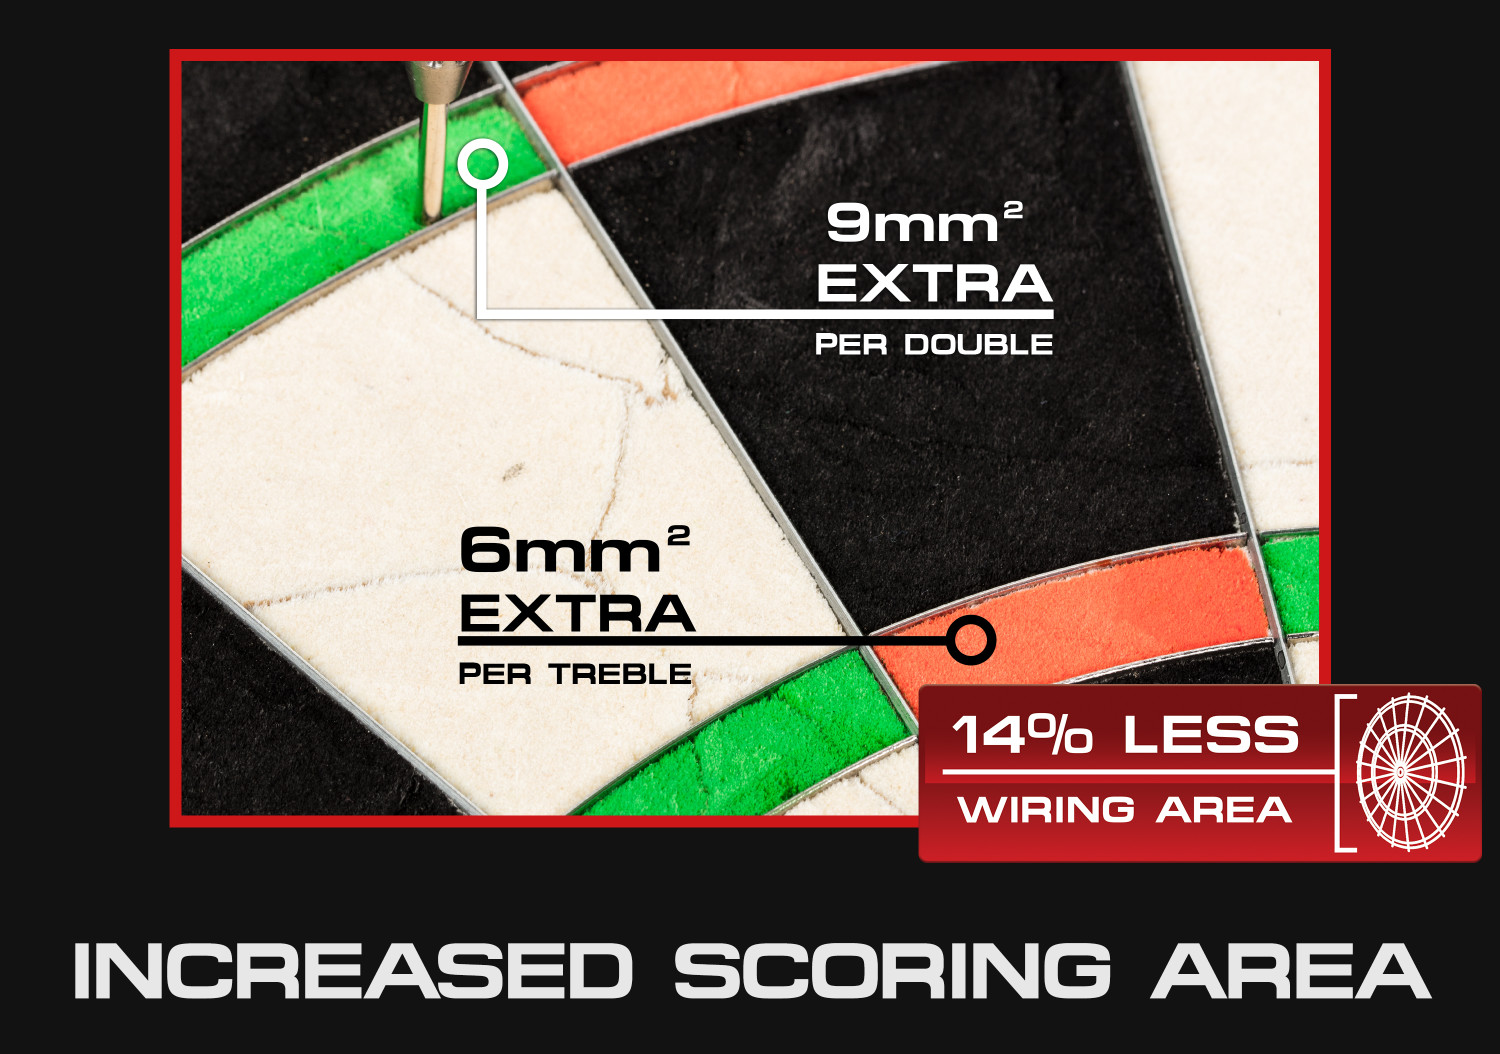 Winmau Darts Blade 5 Bristle Dartboard with All-New Thinner Wiring for Higher Scoring and Reduced Bounce-Outs - image 5 of 10